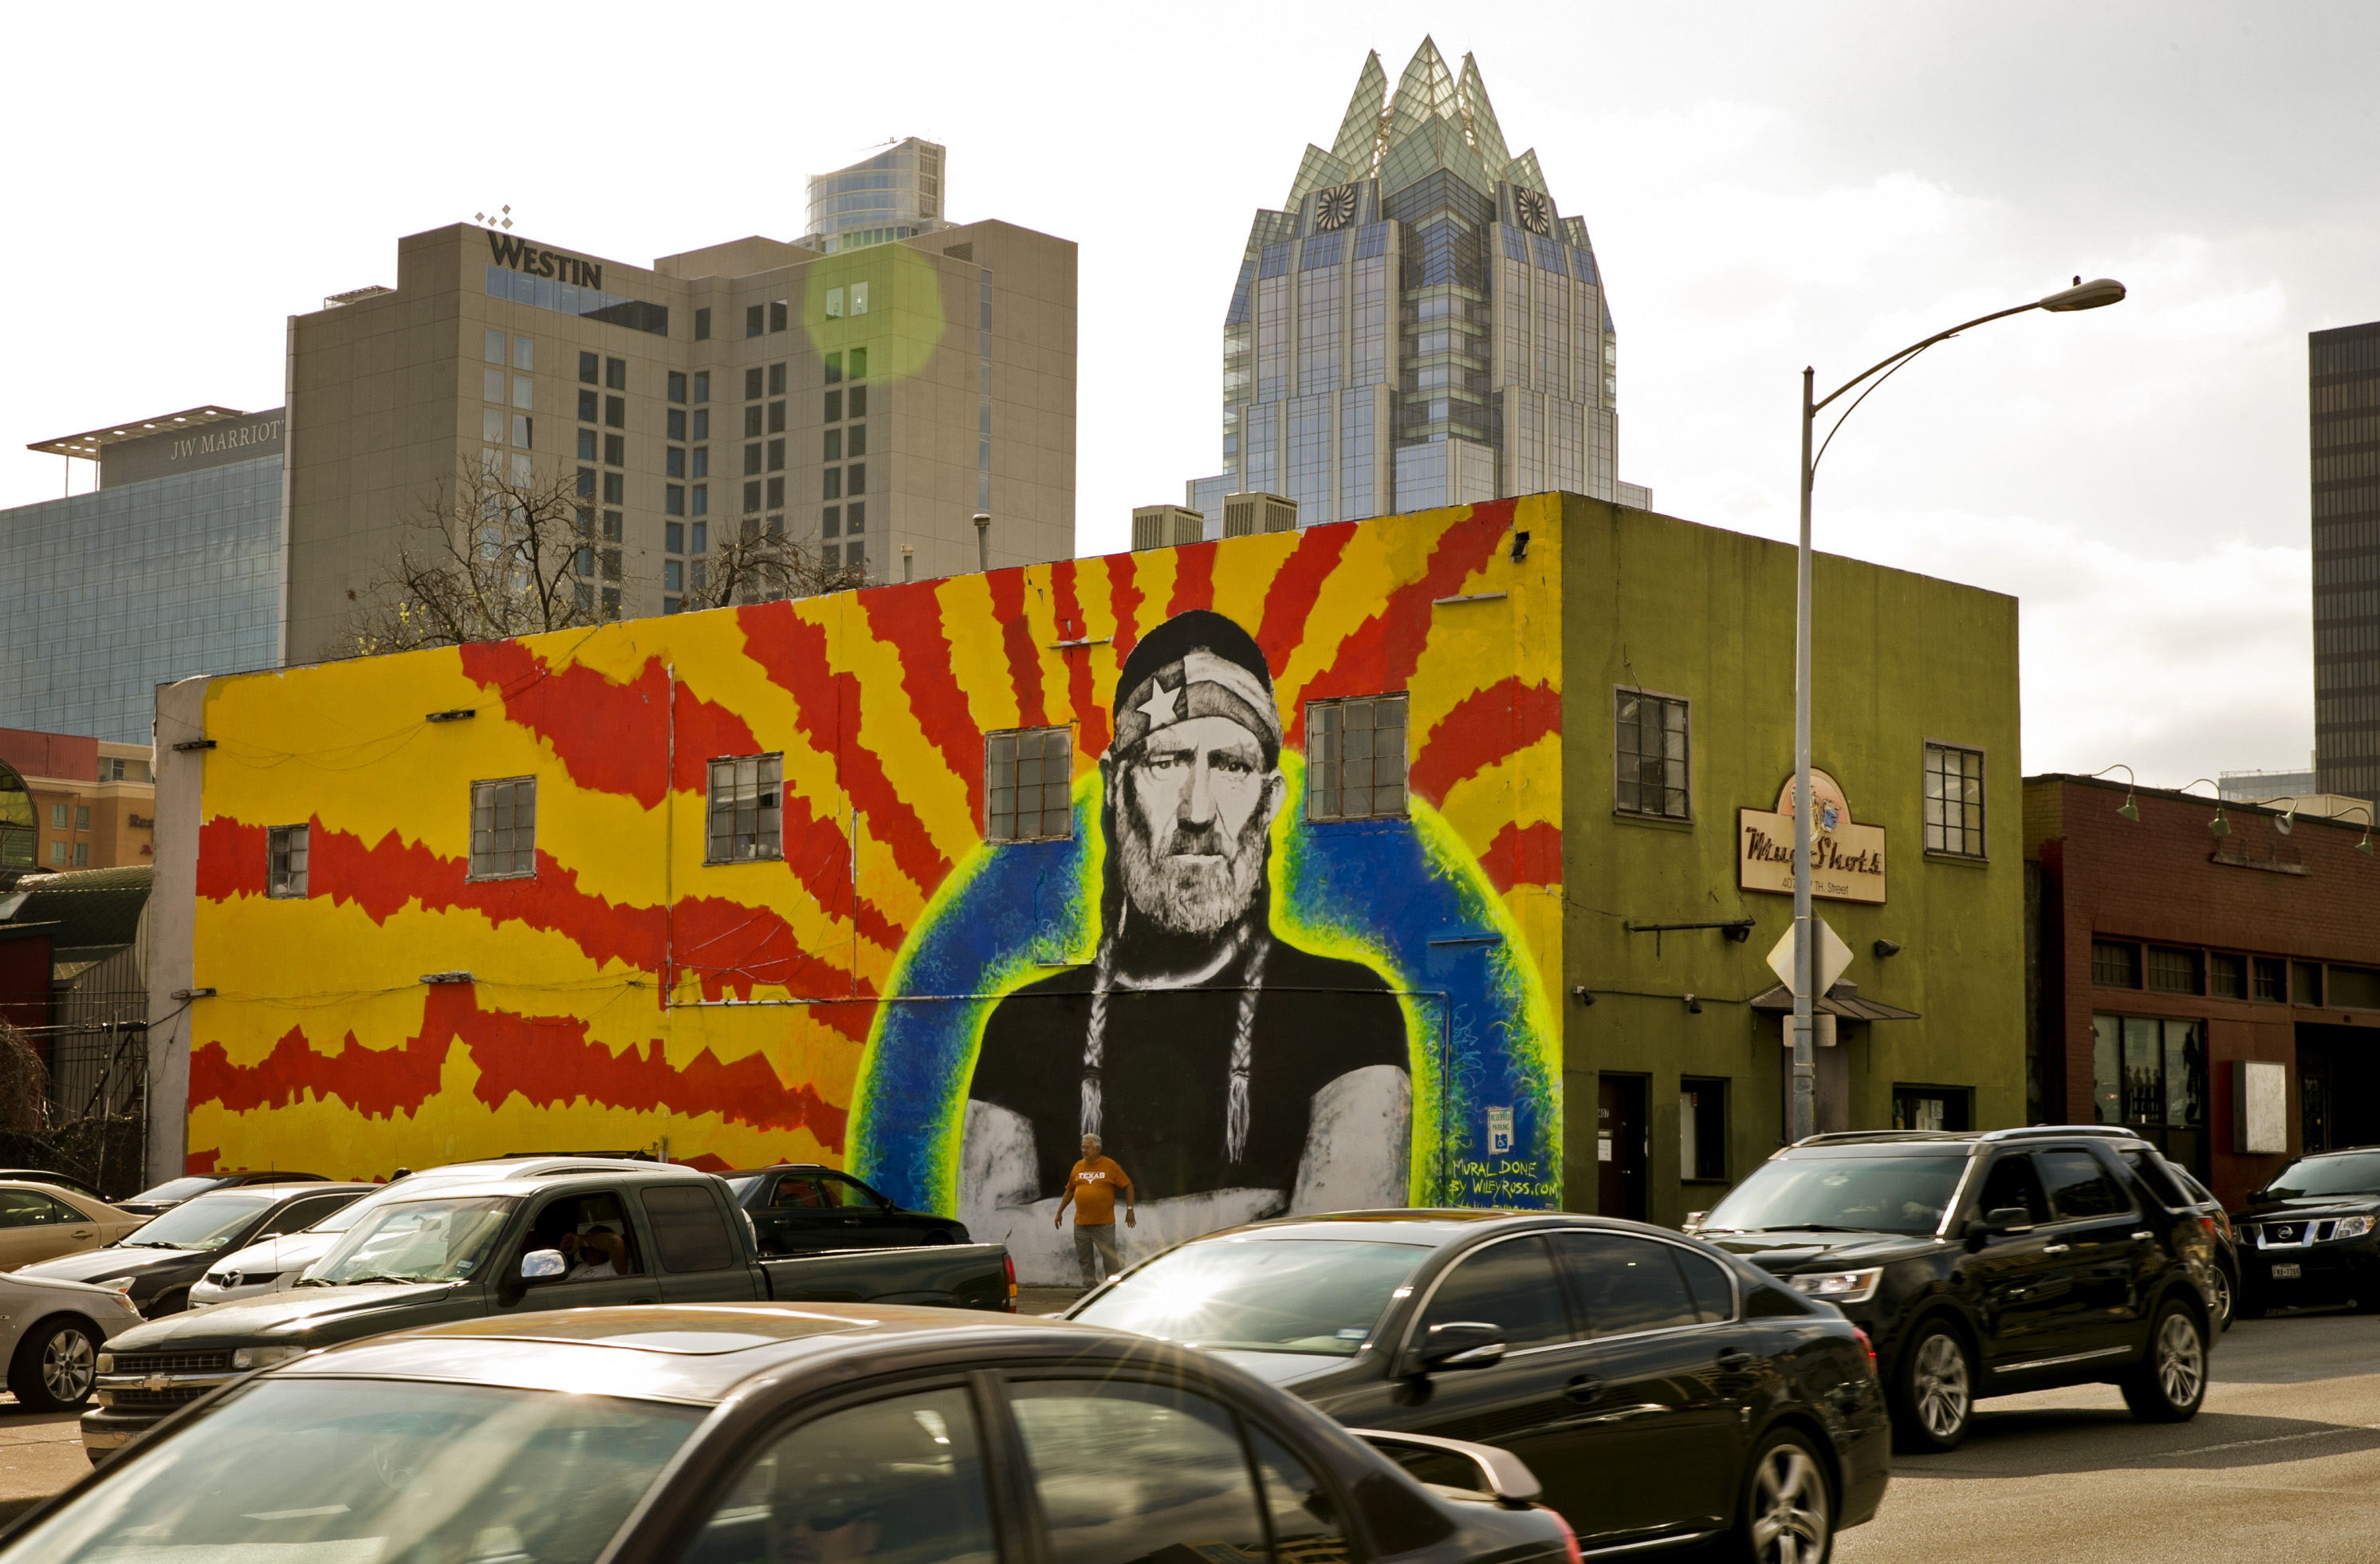 A 60-foot-by-20-foot mural of Willie Nelson looms over traffic on East Seventh Street at Neches Street on Monday, February 22, 2016. Austin artist Wiley Ross completed the mural Sunday after a week of painting. Rudy Duran is dwarfed by the mural while posing for a photo. "He is Texas, as far as I'm concerned," said Duran, who came to look at the mural as soon as he heard about it. JAY JANNER / AMERICAN-STATESMAN